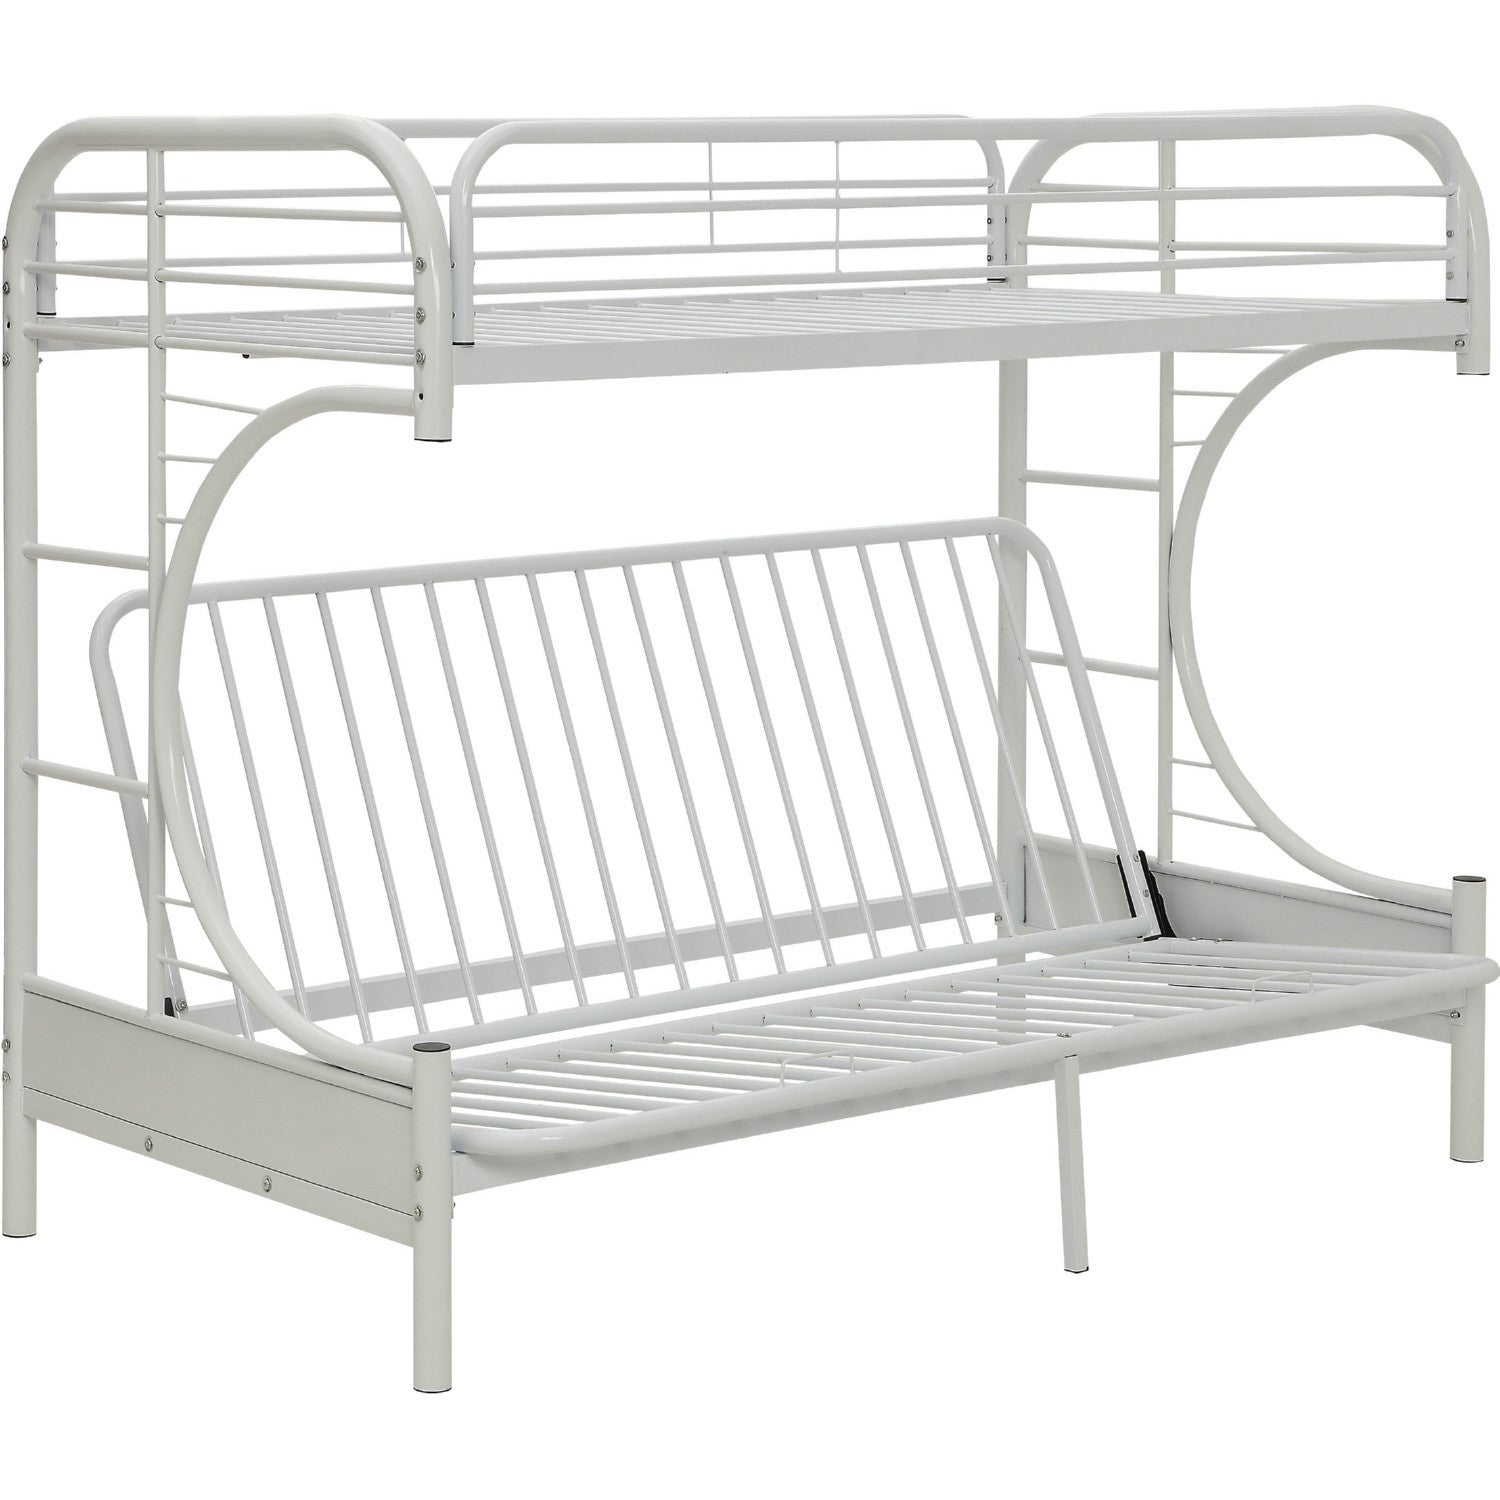 Twin XL Over Queen Futon Bunk Bed | White Metal Frame | Space-Saving Sleep Solution